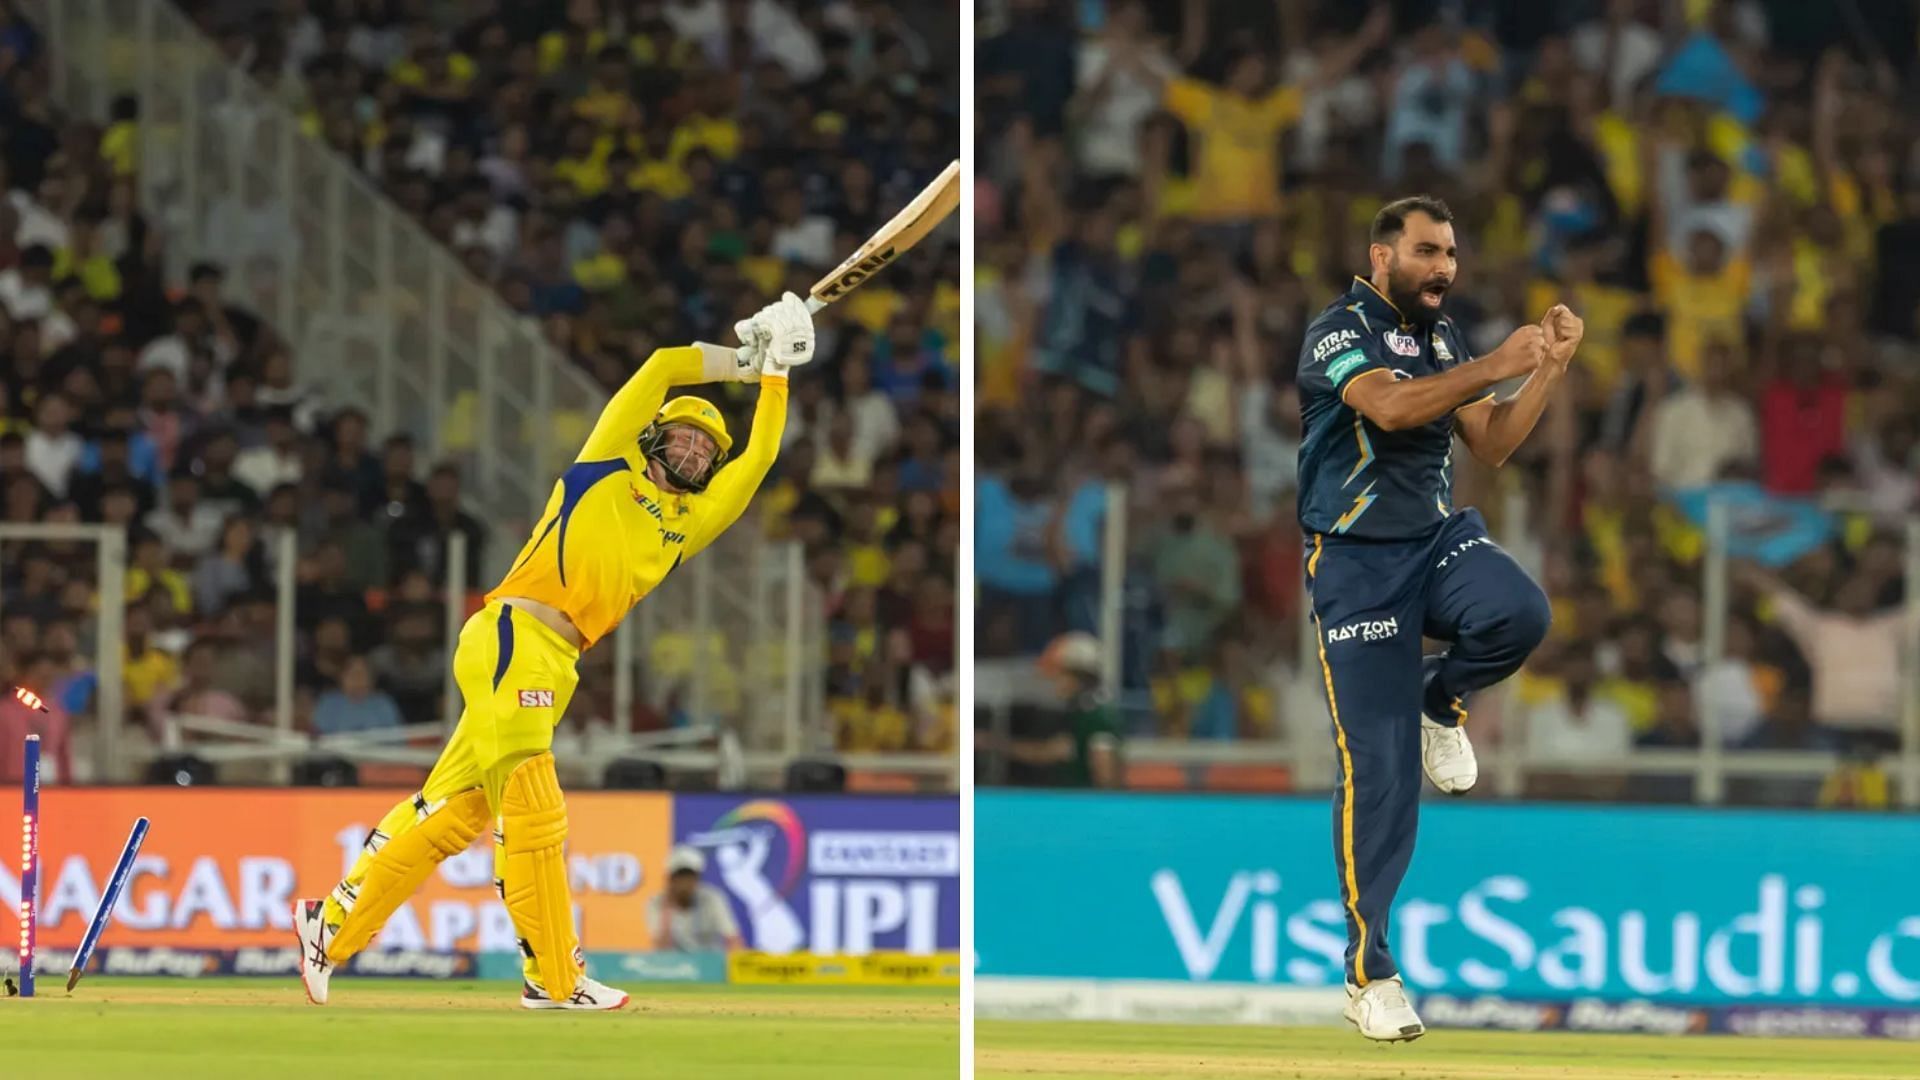 Devon Conway (L) has struggled against Mohammed Shami in the past (P.C.:iplt20.com)